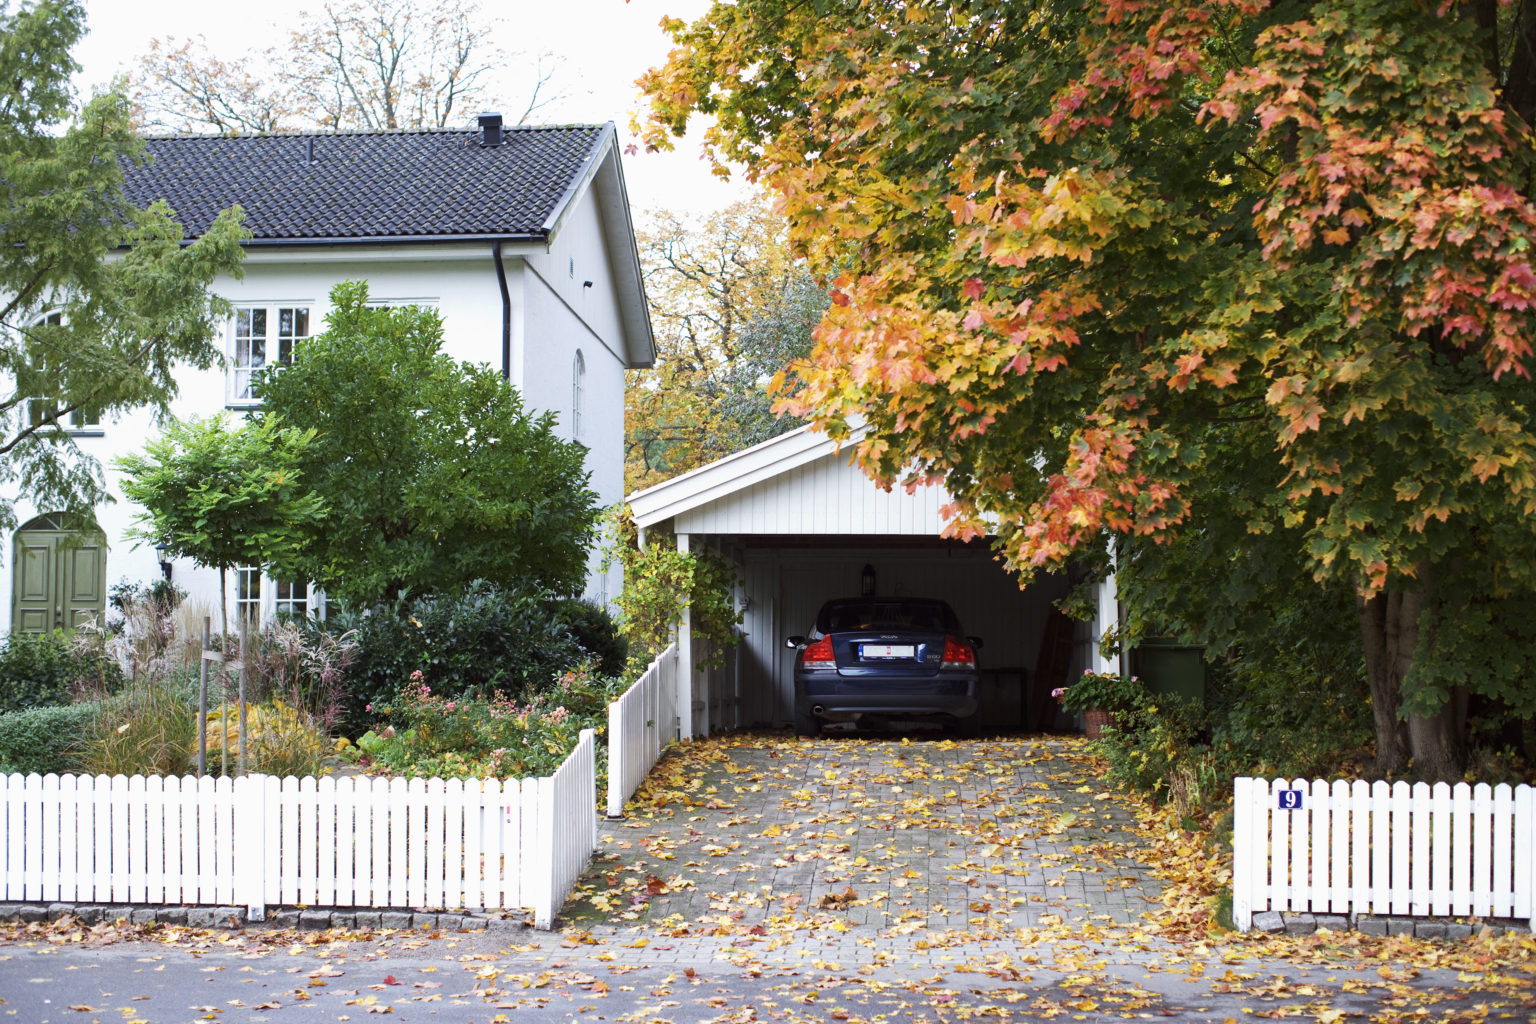 6102-03829170 © Masterfile Royalty-Free Model Release: No Property Release: No A garage with a parked car by a white house, Sweden.